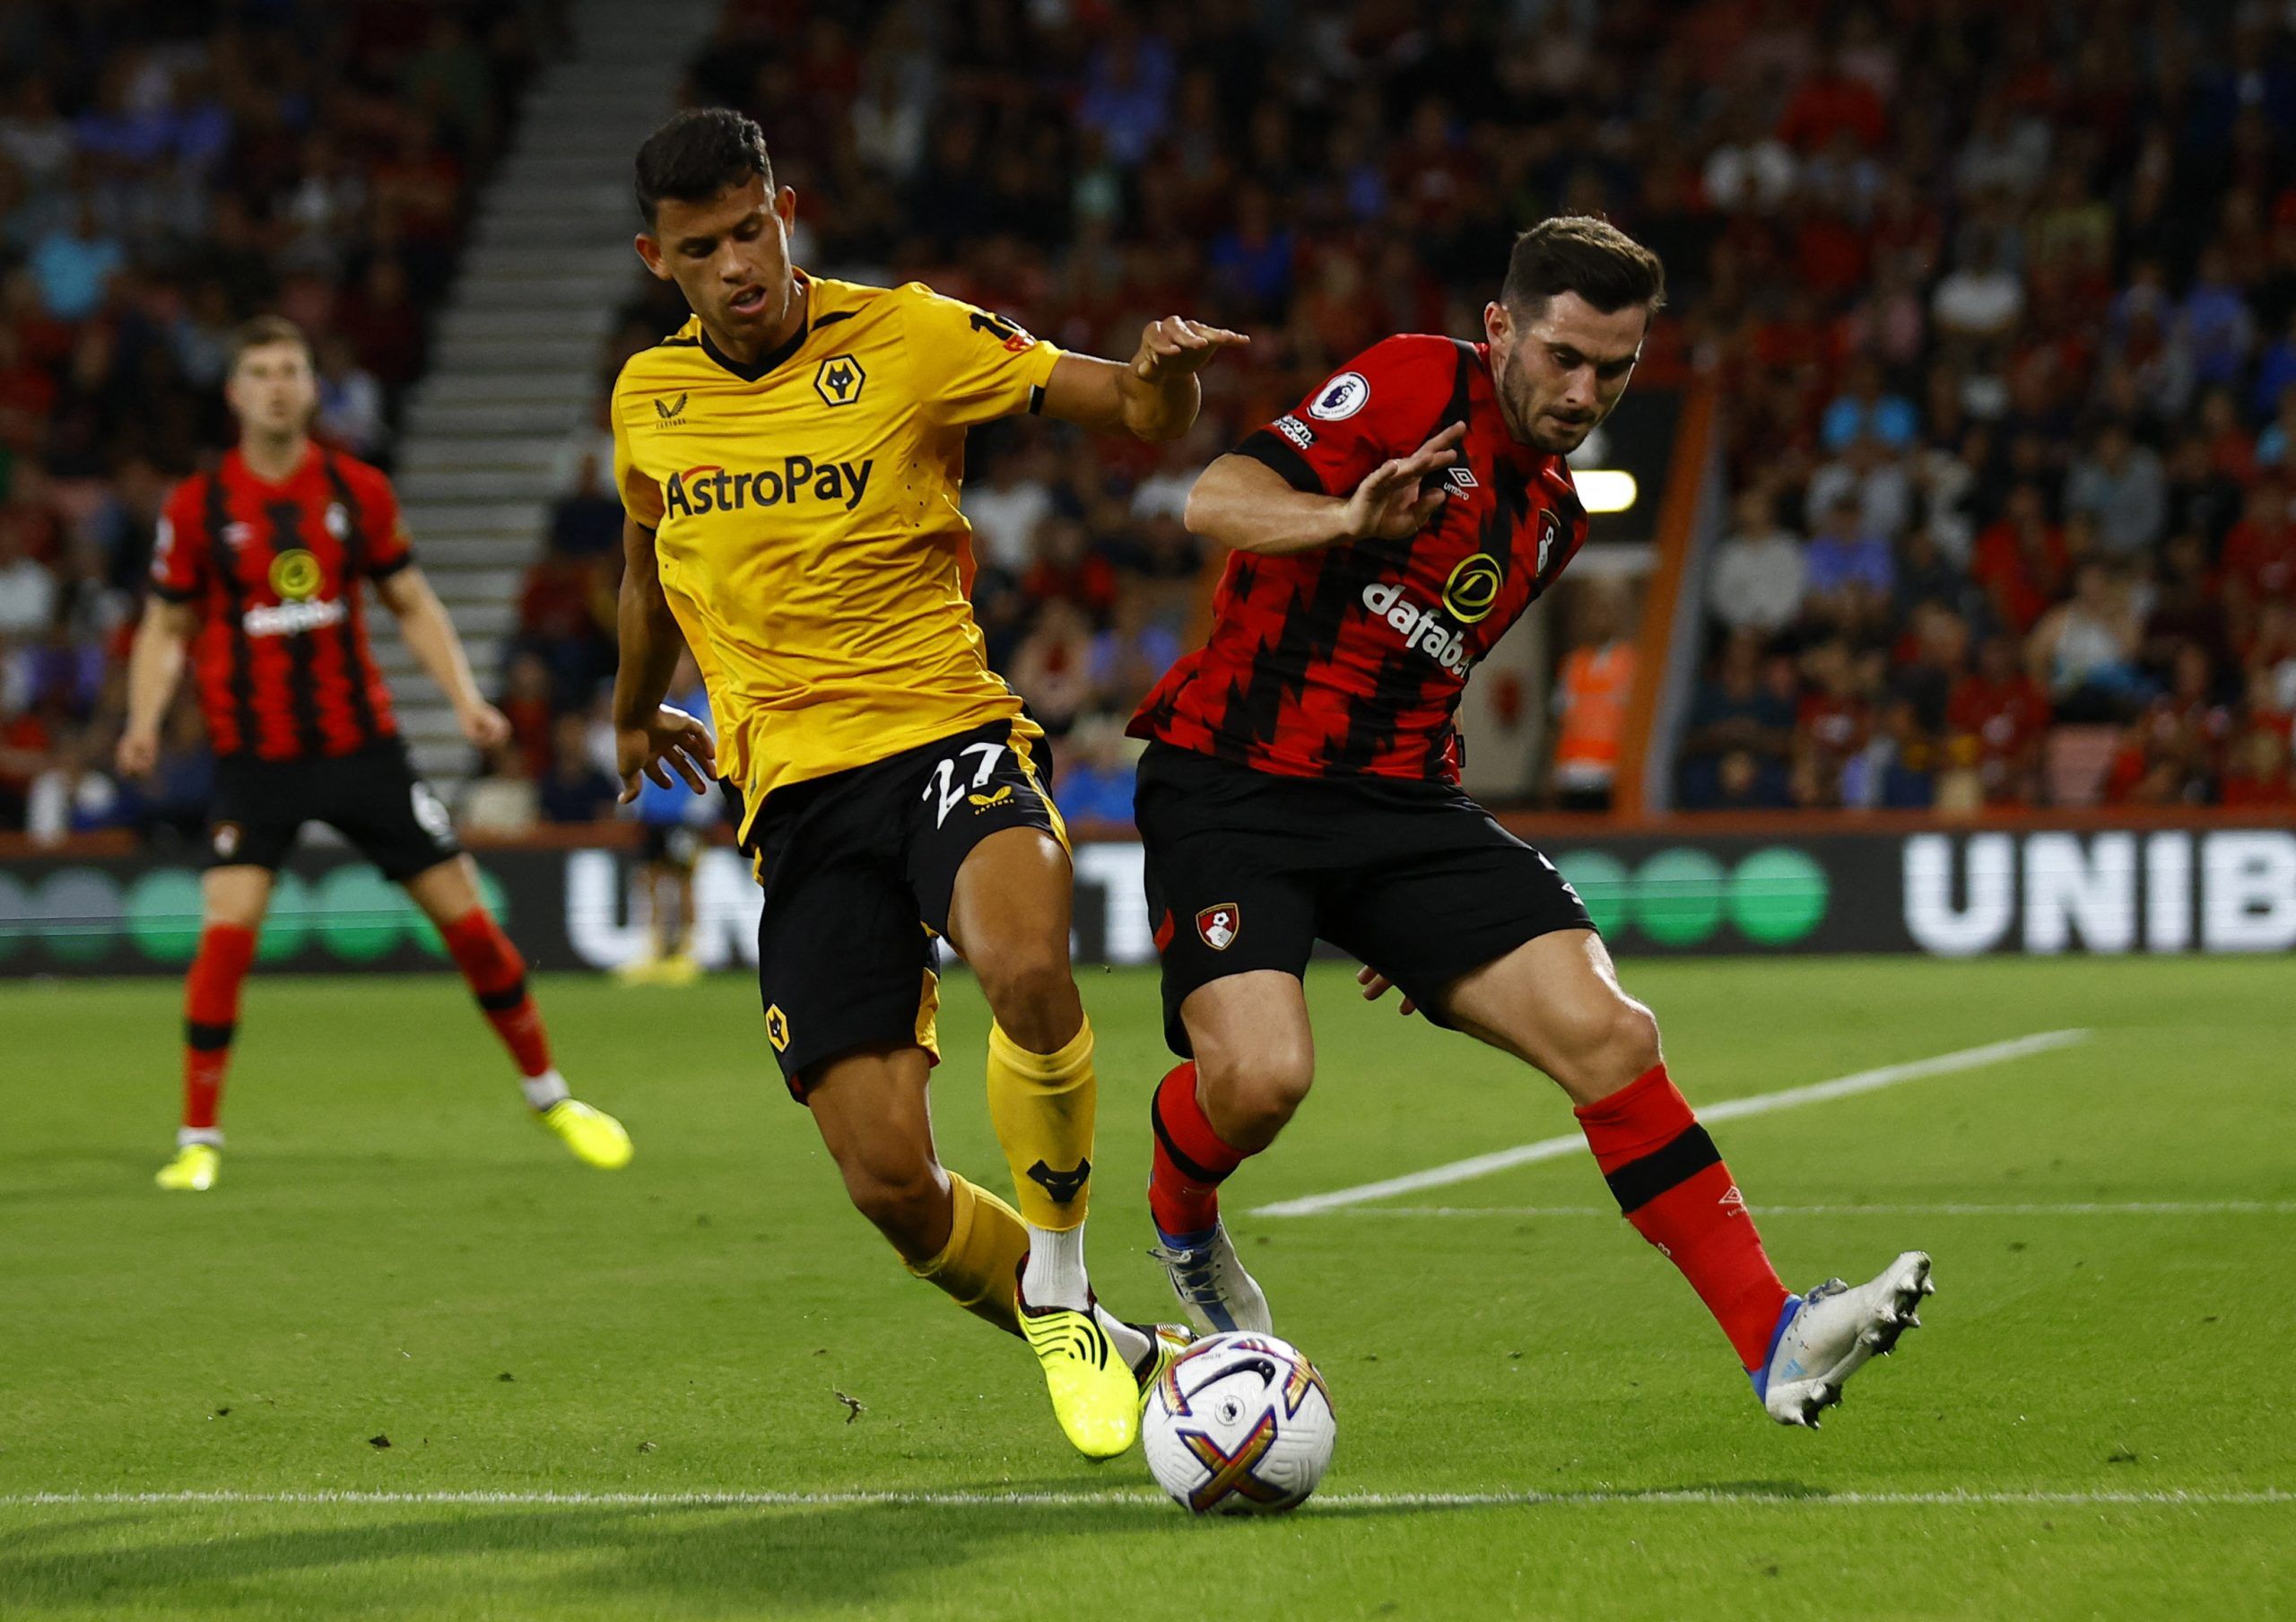 Soccer Football - Premier League - AFC Bournemouth v Wolverhampton Wanderers - Vitality Stadium, Bournemouth, Britain - August 31, 2022 Wolverhampton Wanderers' Matheus Nunes in action with AFC Bournemouth's Lewis Cook Action Images via Reuters/Andrew Boyers EDITORIAL USE ONLY. No use with unauthorized audio, video, data, fixture lists, club/league logos or 'live' services. Online in-match use limited to 75 images, no video emulation. No use in betting, games or single club /league/player public